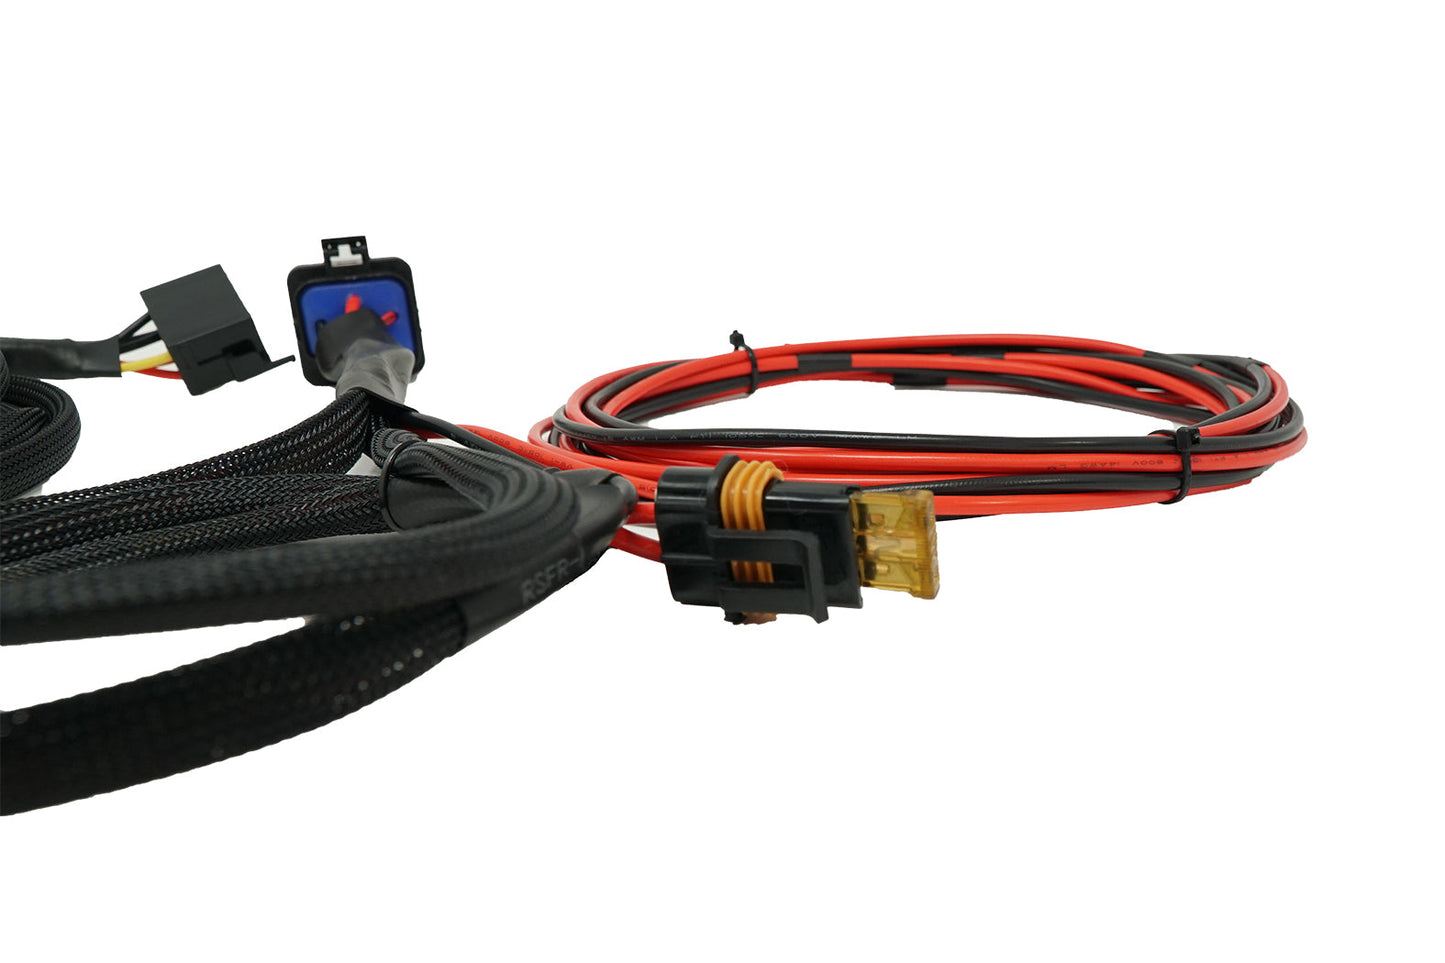 UTVS High Current Harness - For RZR Pro Series